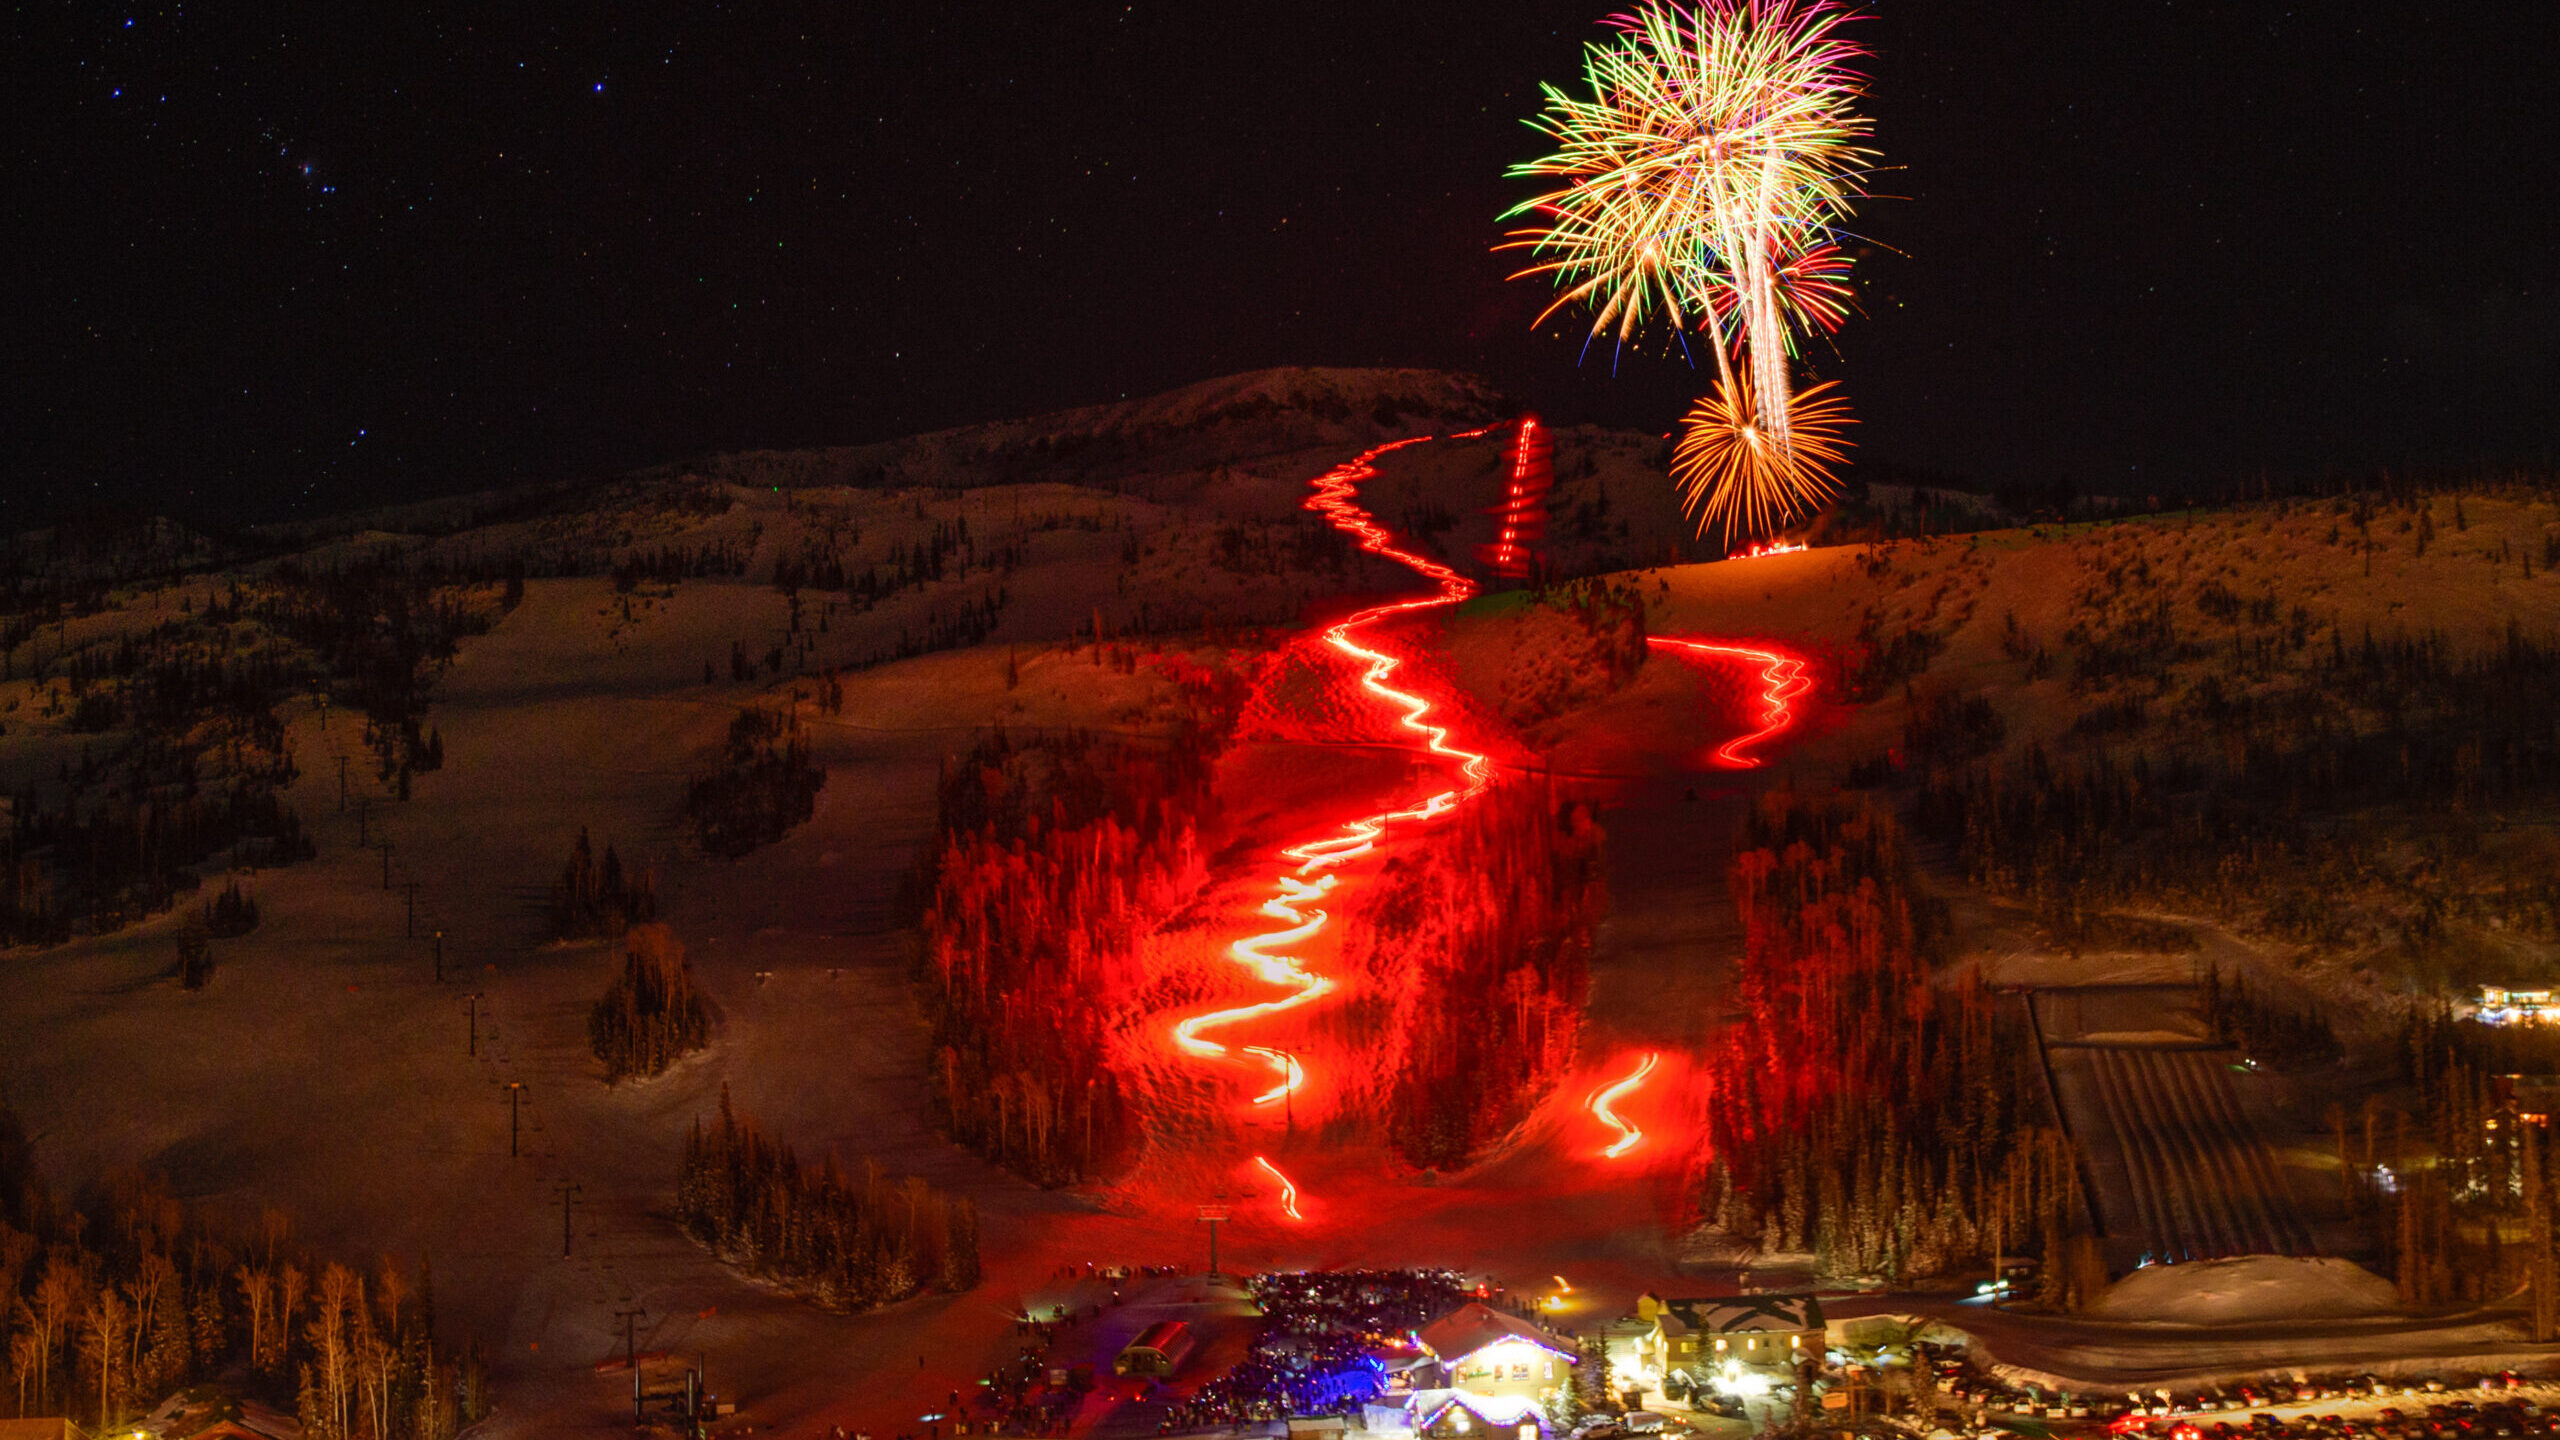 Brian Head Ski Resort is one of several venues hosting New Year's Eve celebrations. (Mike Saemisch/...